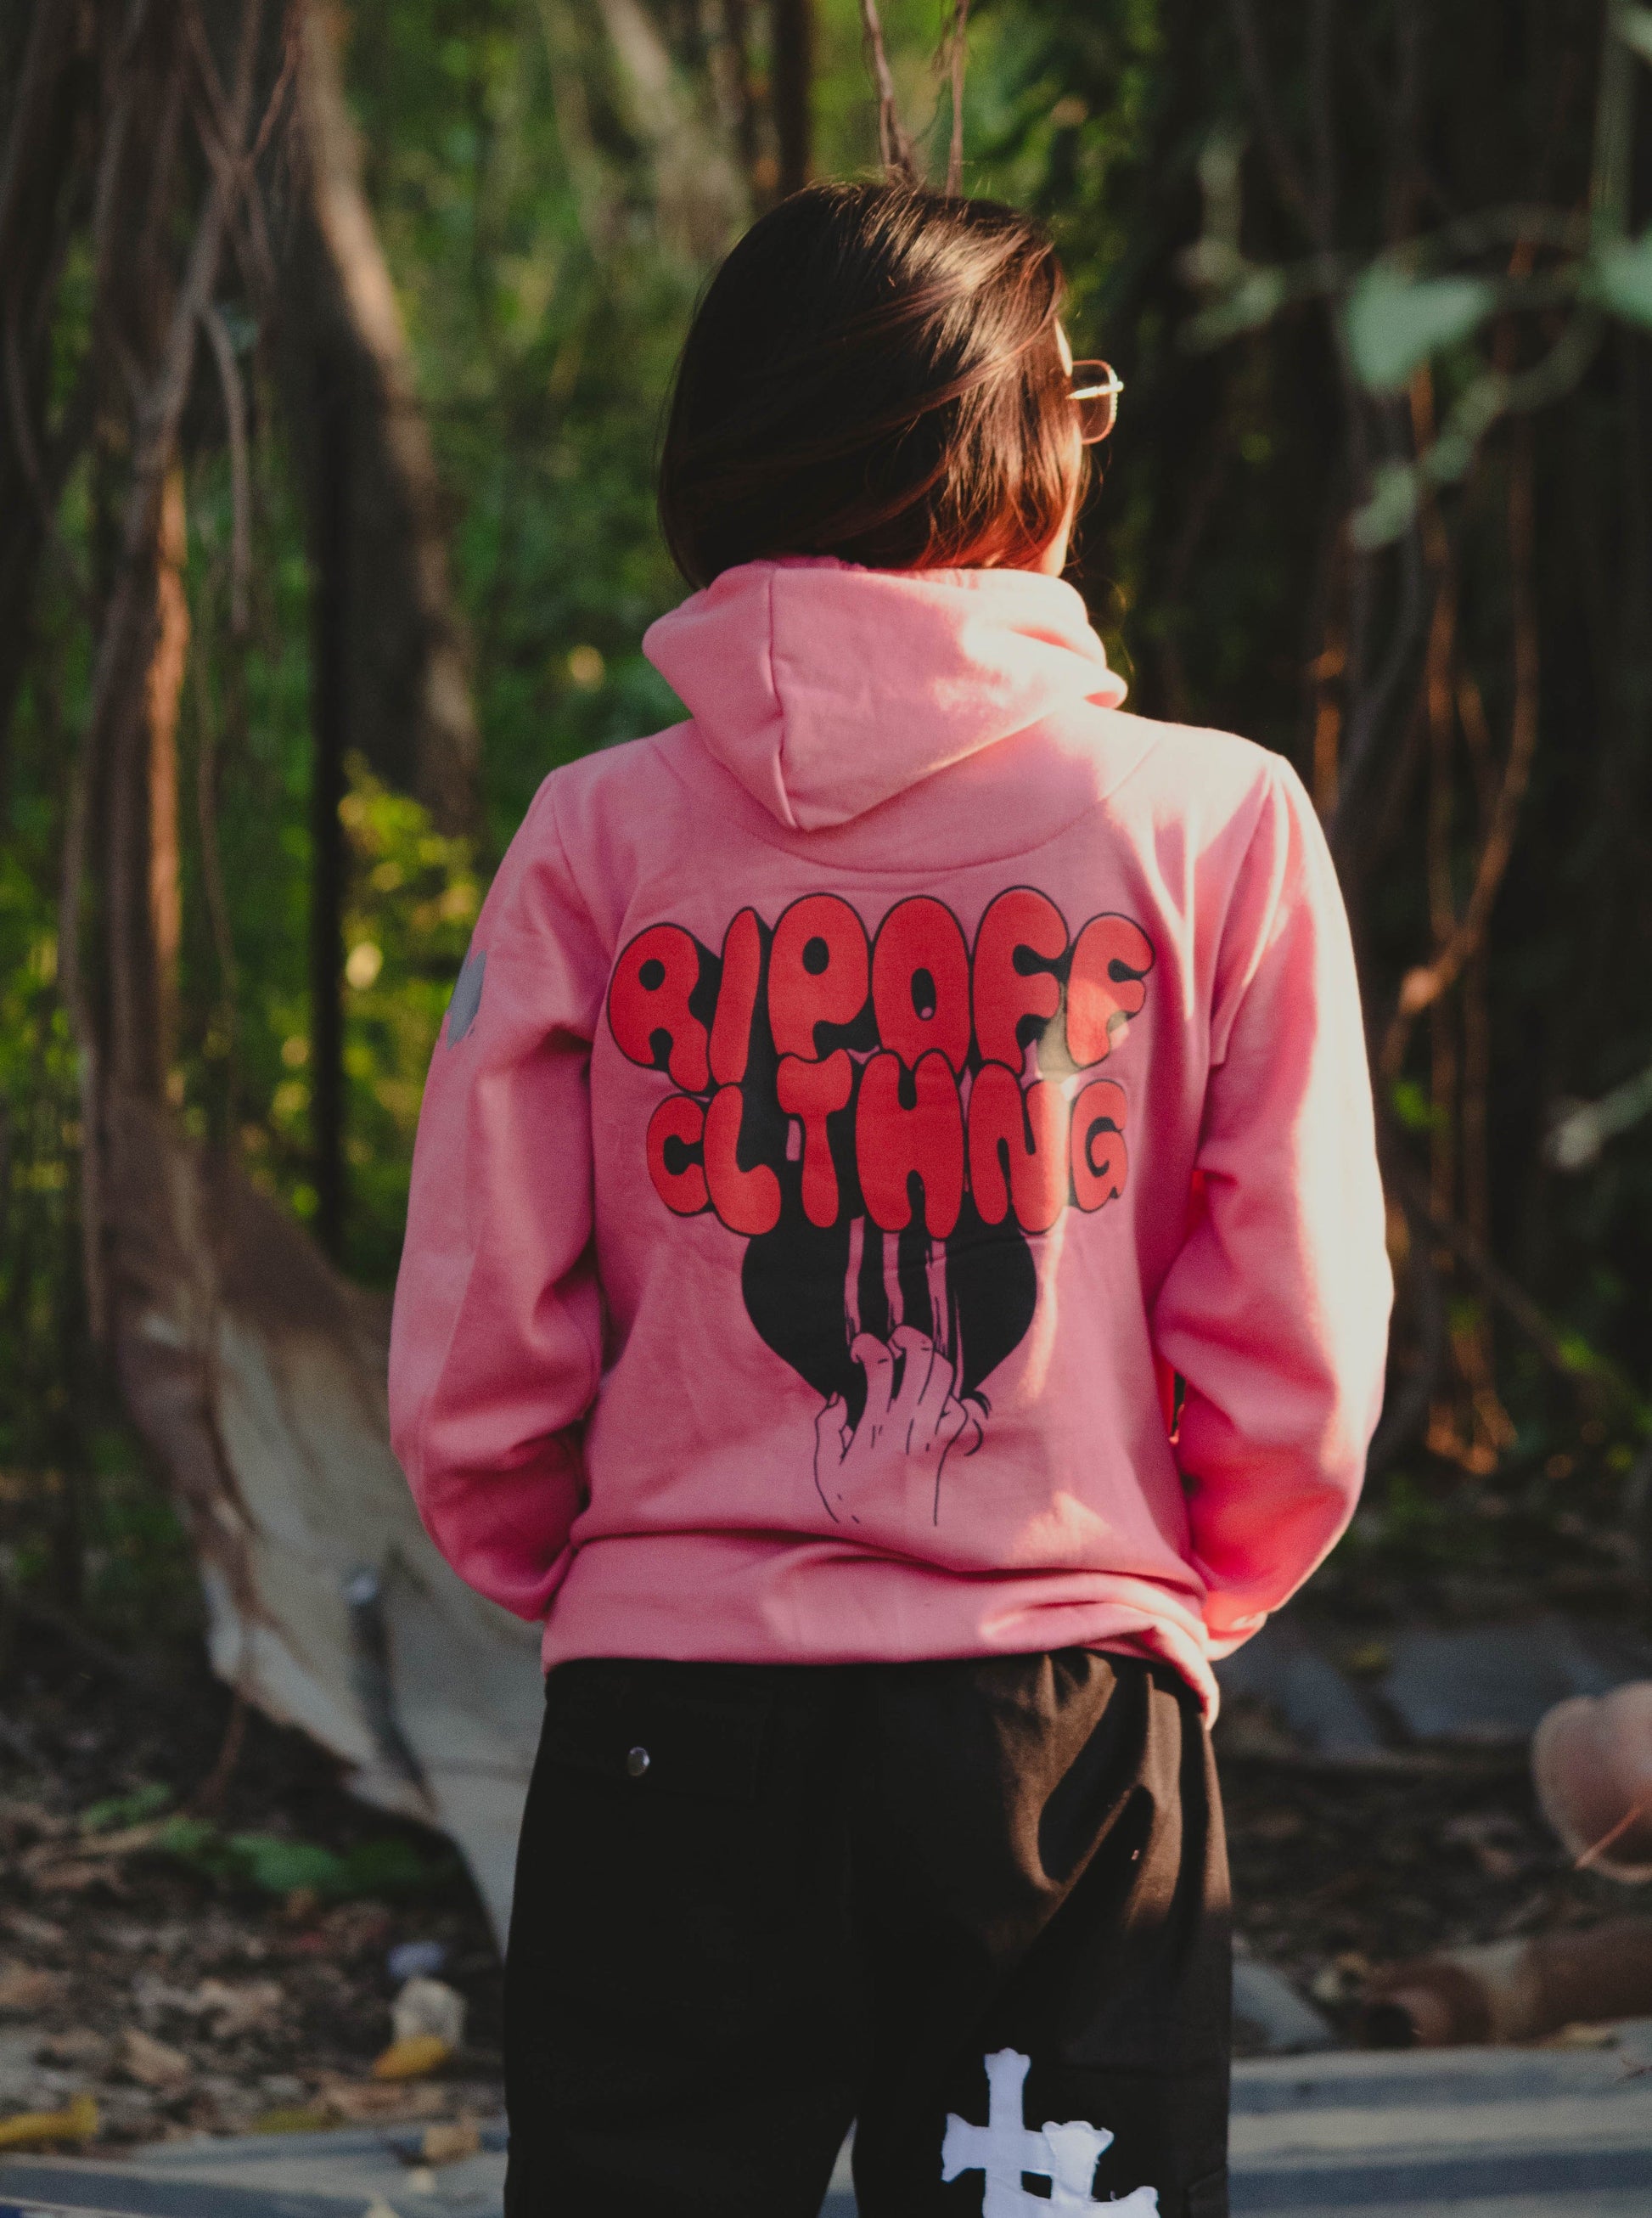 Ripped hearts Hoodie – Ripoff